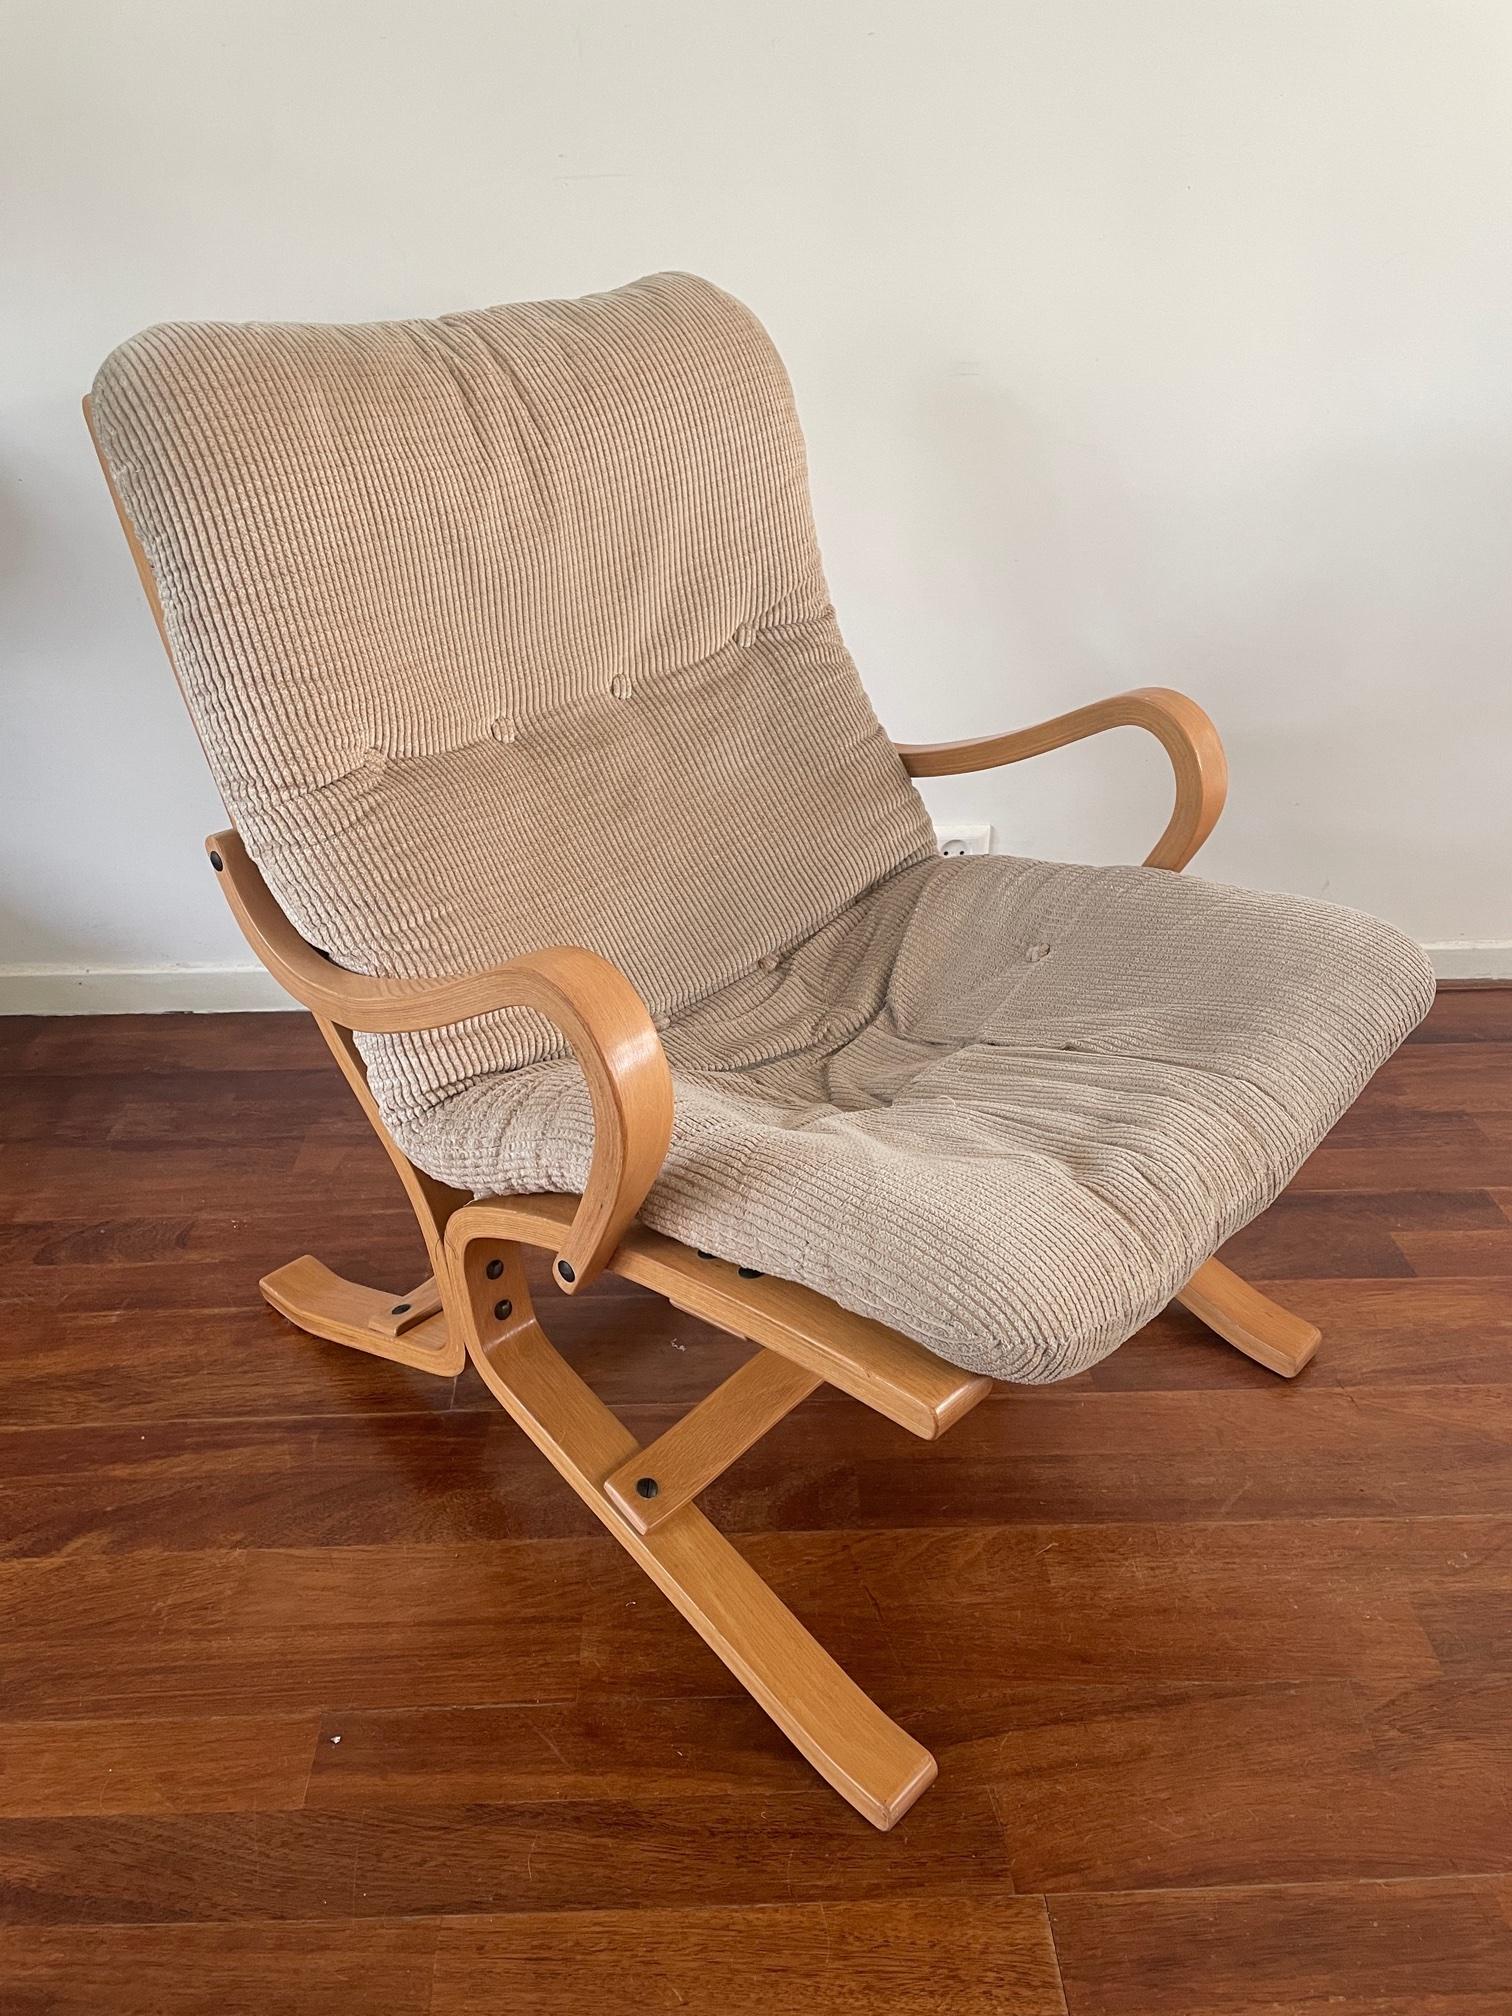 What a beautiful piece of furniture! This early Ingmar Relling is a lust for the eye. The curves, the material and the little details such as the push button to connect the cushion to the frame. A real nice item which withstood the time real good.